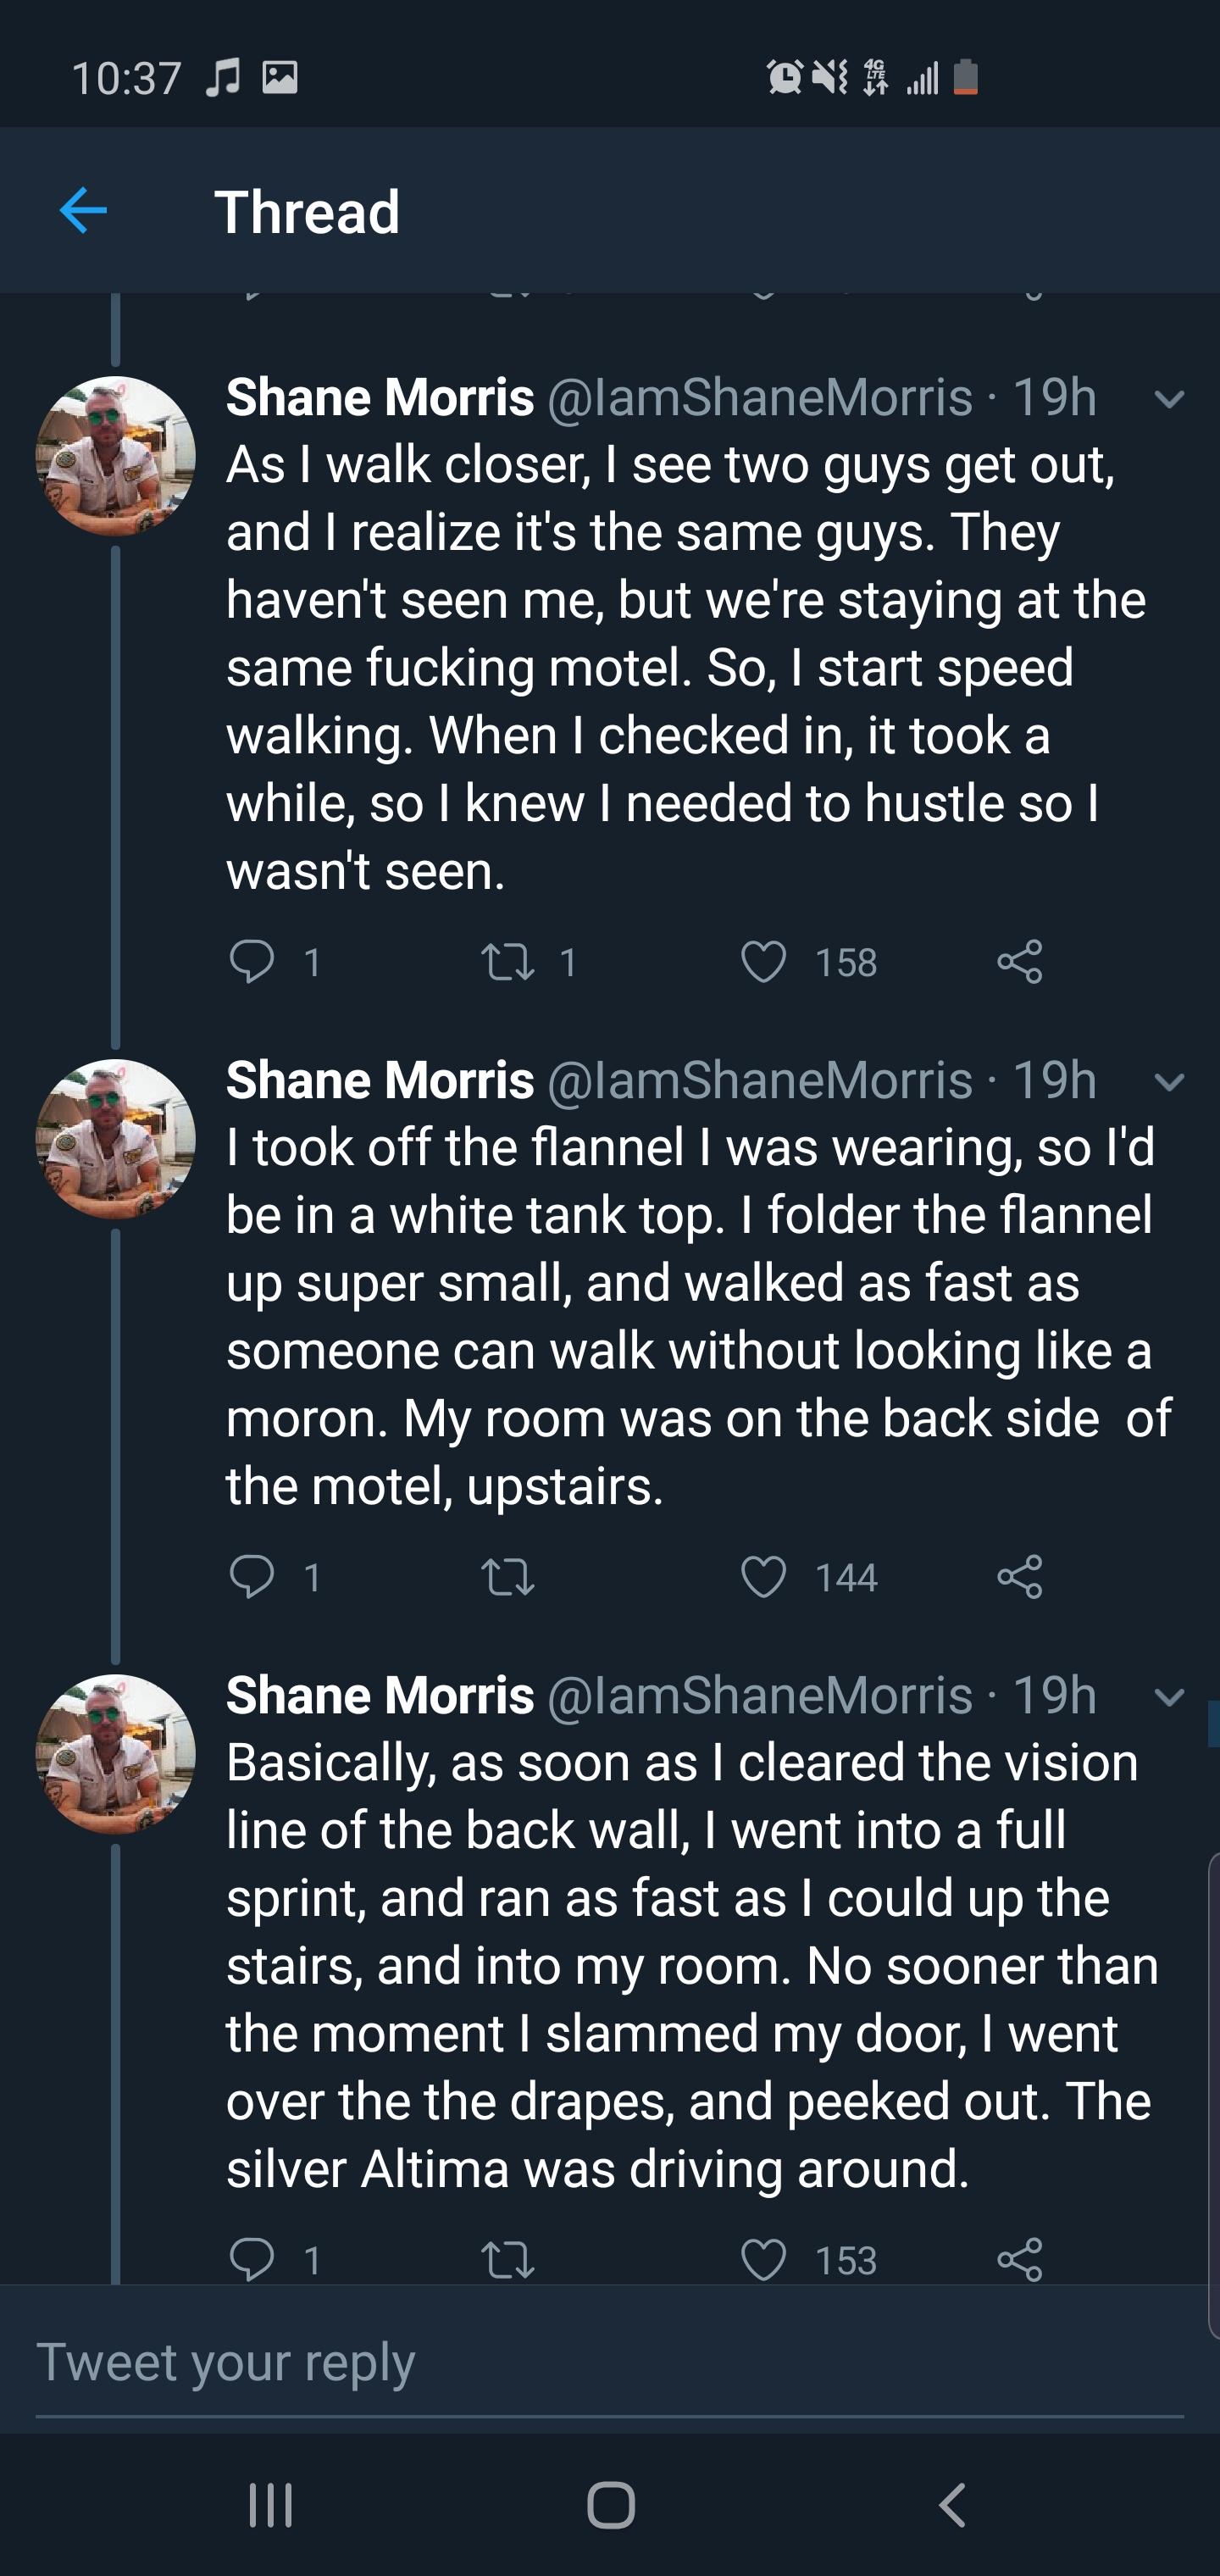 screenshot - Je Os Thread Shane Morris 19h As I walk closer. I see two guys get out, and I realize it's the same guys. They haven't seen me, but we're staying at the same fucking motel. So, I start speed walking When I checked in, it took a while, so I kn